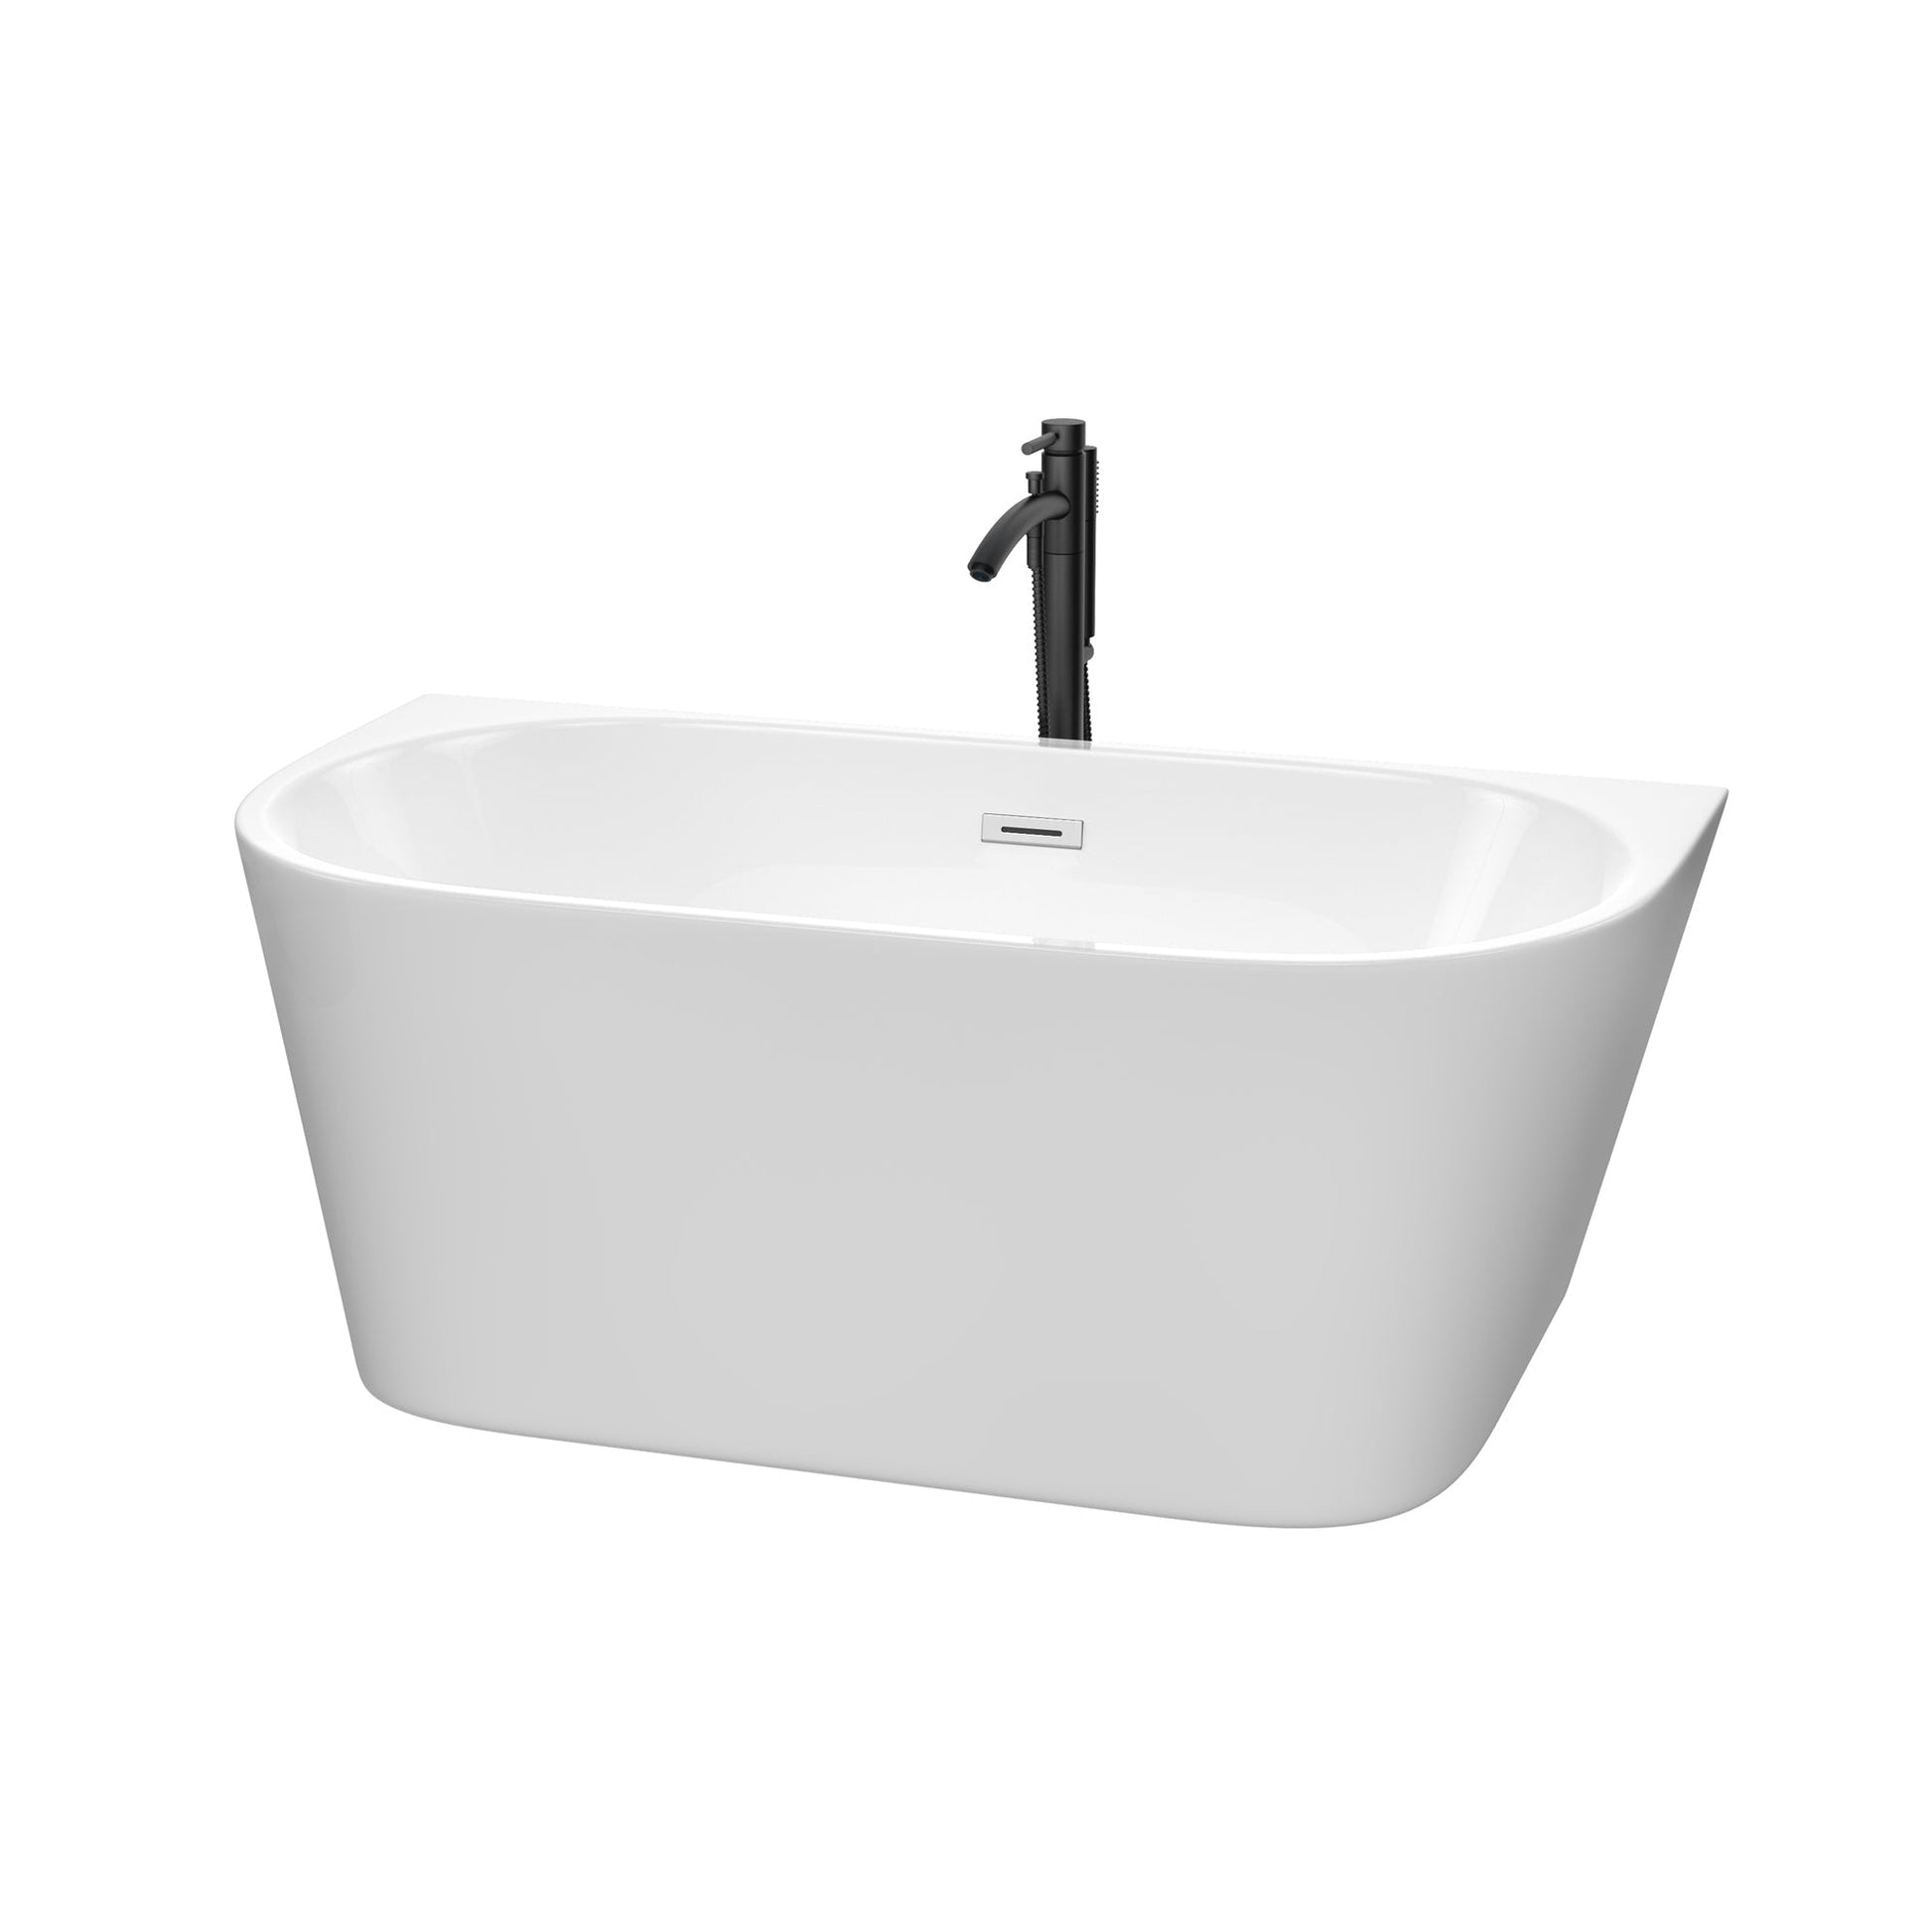 Wyndham Collection Callie 59" Freestanding Bathtub in White With Polished Chrome Trim and Floor Mounted Faucet in Matte Black